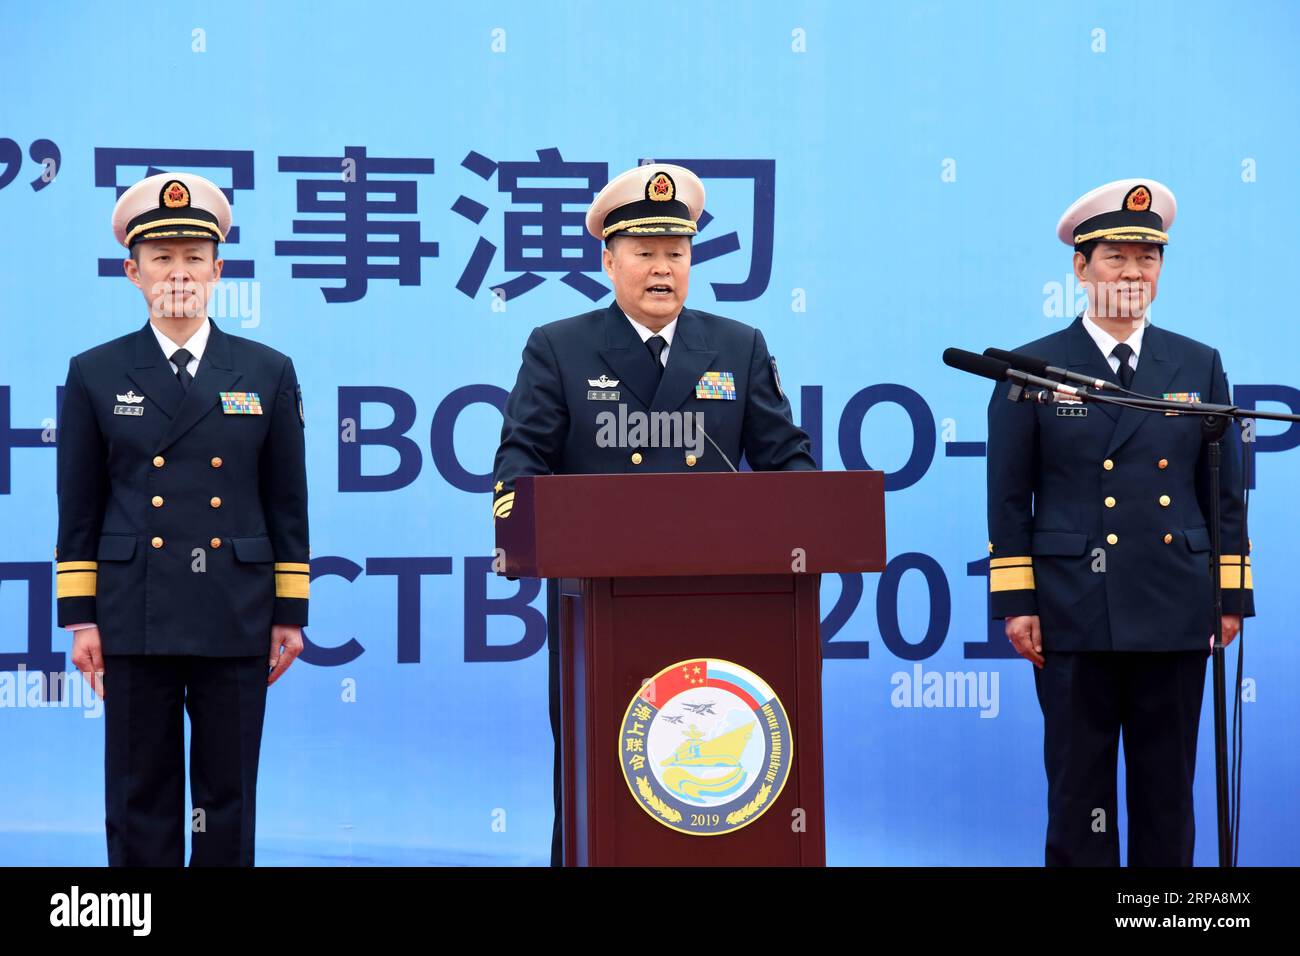 (190429) -- QINGDAO, April 29, 2019 (Xinhua) -- Qiu Yanpeng (C), chief director of Joint Sea-2019 exercise from the Chinese side and deputy commander of the Chinese People s Liberation Army (PLA) Navy, delivers a speech at the welcome ceremony for Russian navy vessels in Qingdao, east China s Shandong Province, April 29, 2019. Russian naval vessels arrived in Qingdao on Monday to participate in the Sino-Russian Joint Sea-2019 exercise. The exercise will focus on joint sea defense, which aims to consolidate and develop the China-Russia comprehensive strategic partnership of coordination, deepen Stock Photo